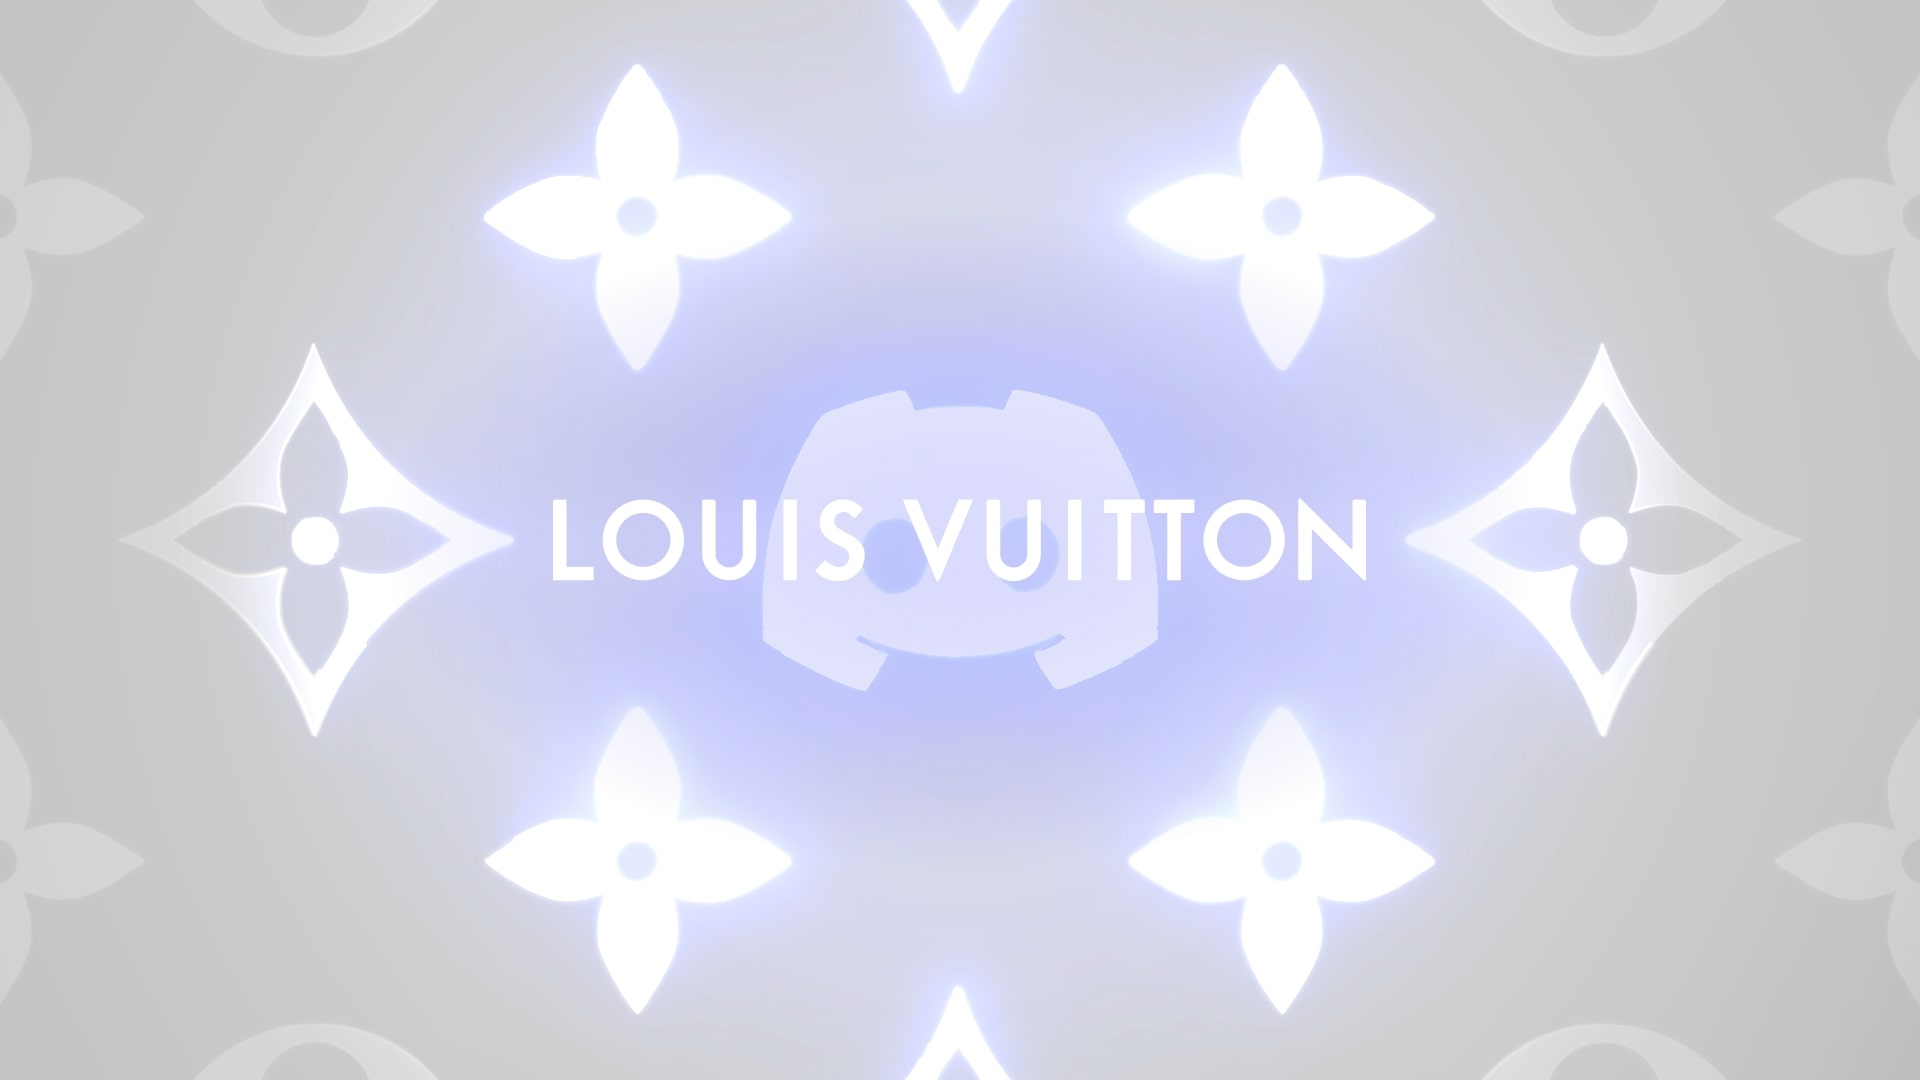 Louis Vuitton Shares First Digital Collectible With Iconic Trunk